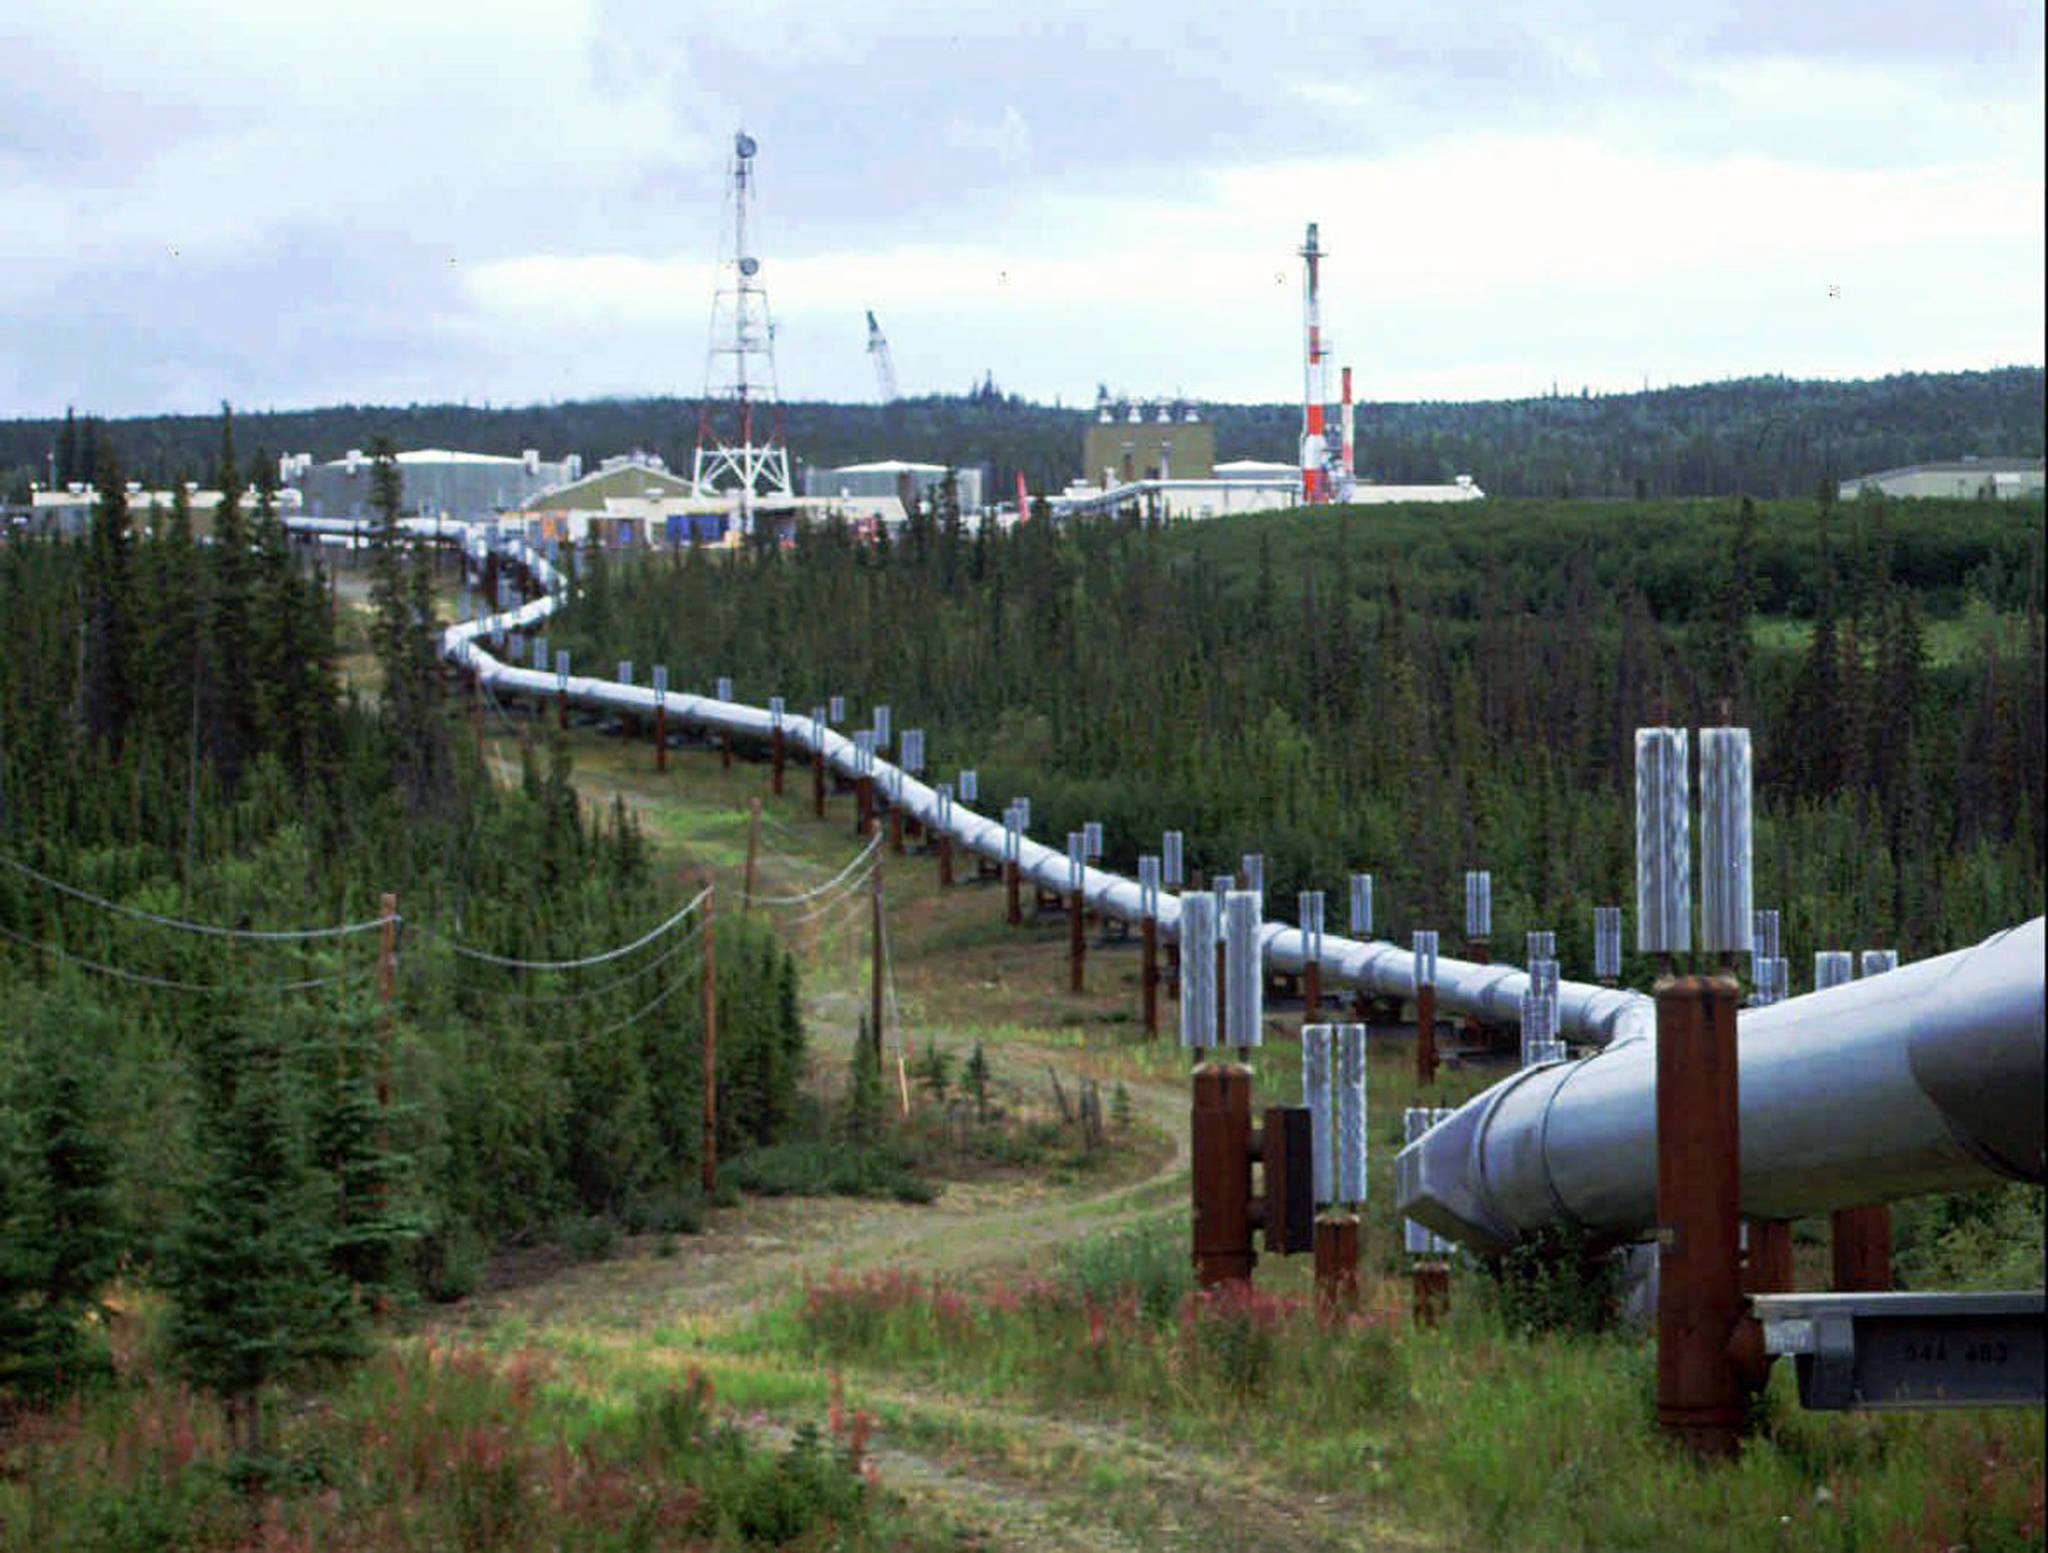 This undated file photo shows the Trans-Alaska pipeline and pump station north of Fairbanks, Alaska. The future of Alaska’s unique program of paying residents an annual check is in question, with oil prices low and an economy struggling during the coronavirus pandemic. (AP Photo | Al Grillo, File)